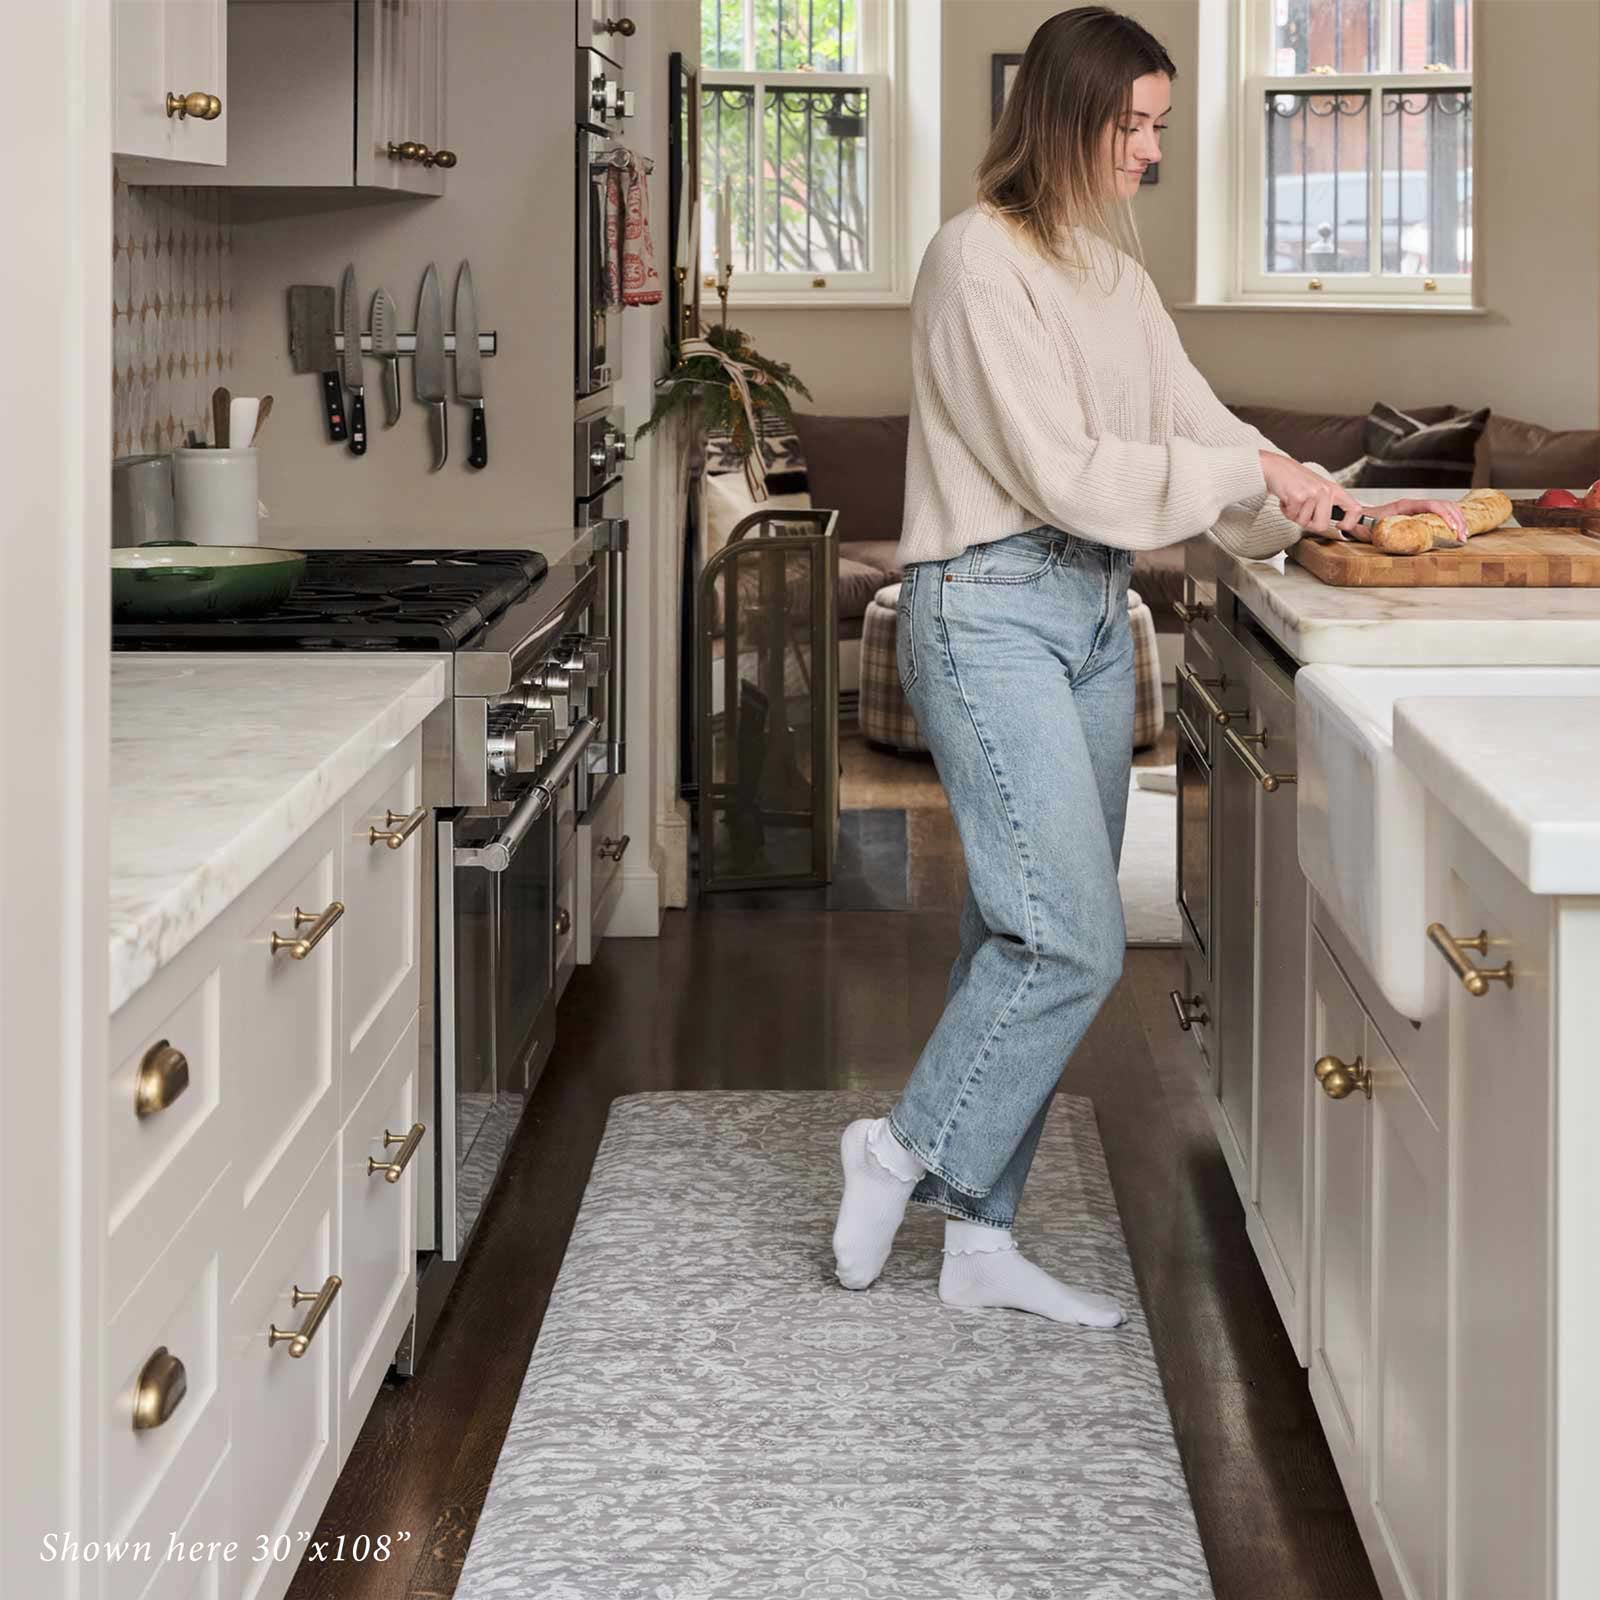 Emile earl grey gray and cream floral standing mat shown in kitchen in size 30x108 with woman standing on the mat cutting bread on a cutting board on the counter